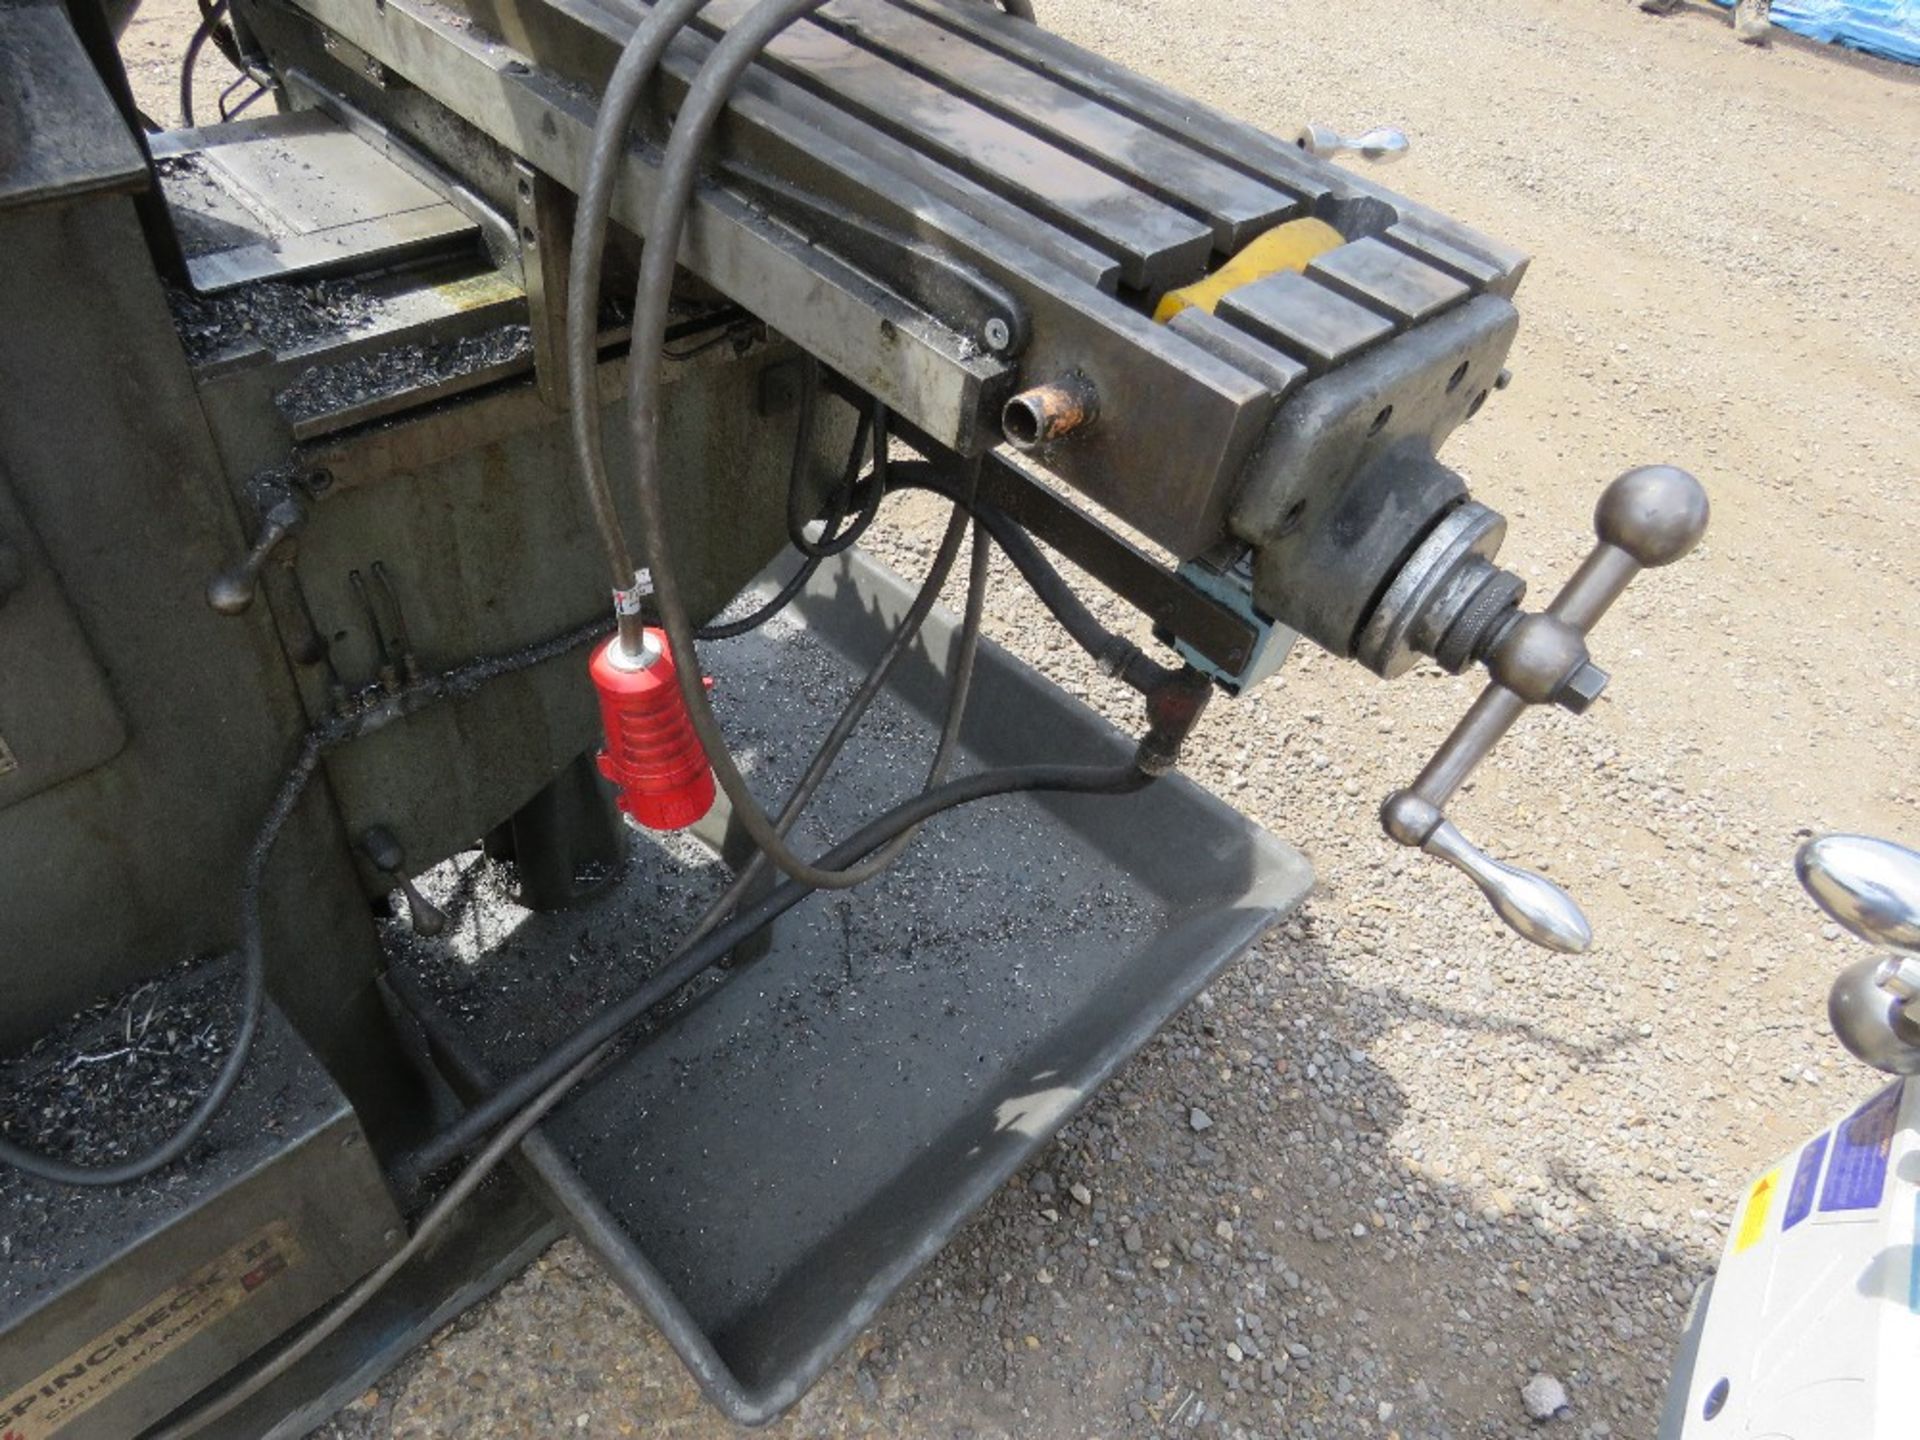 BRIDGEPORT MILLING MACHINE WITH CONTROLLER UNIT AS SHOWN. SOURCED FROM DEPOT CLOSURE. - Image 10 of 12